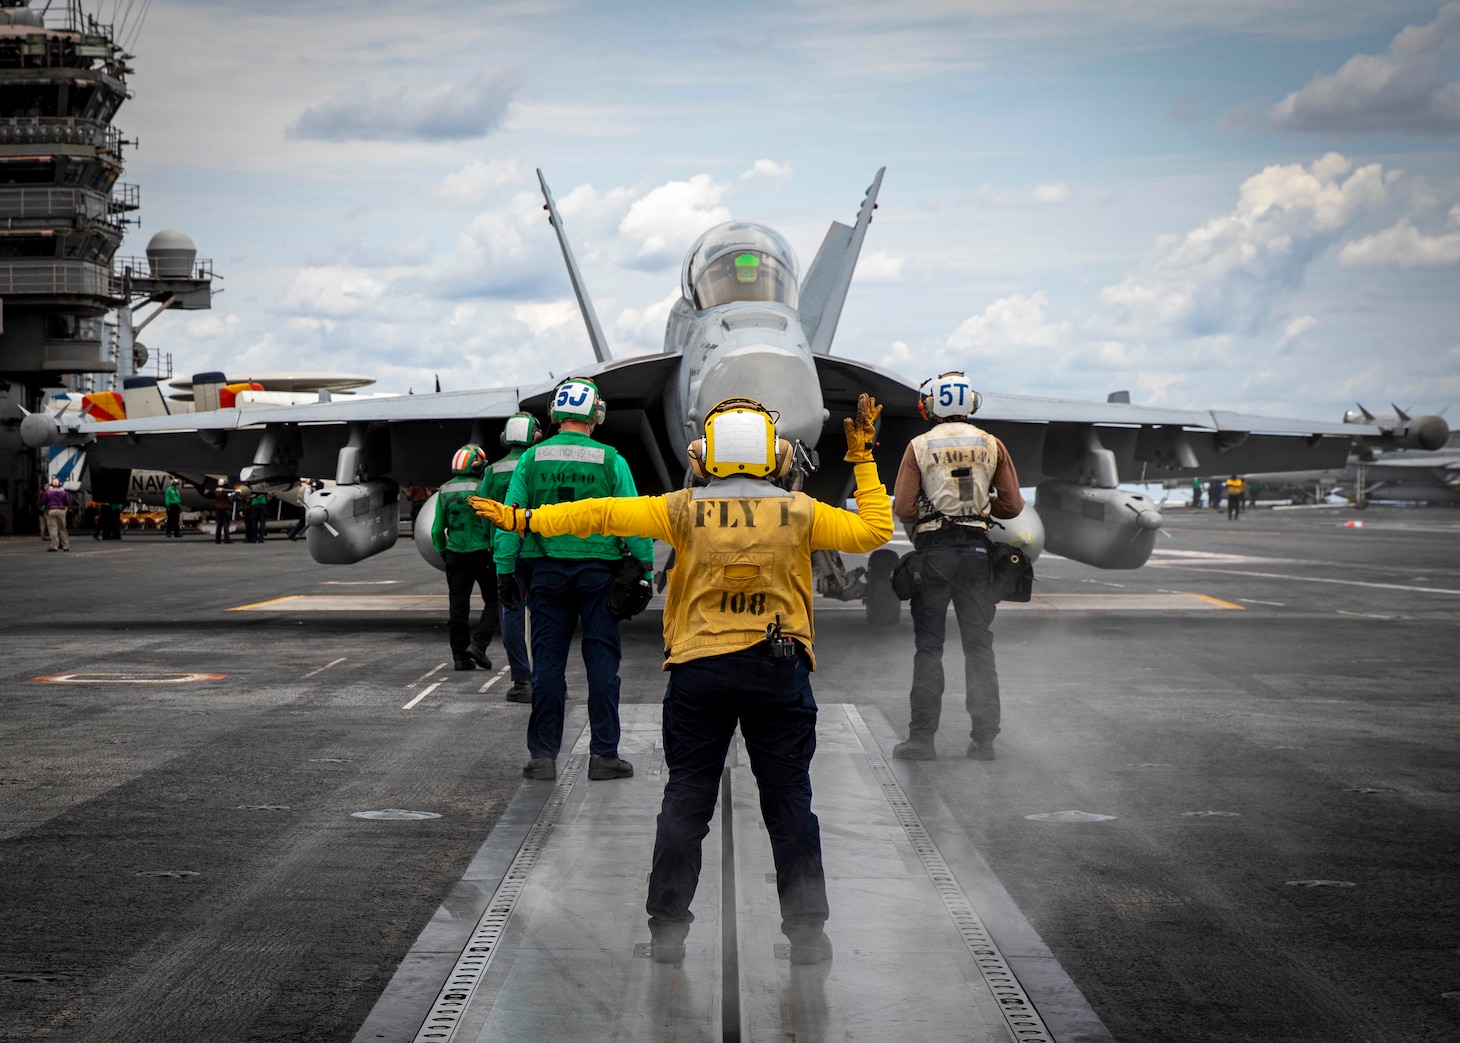 An E/A-18G Growler aircraft, attached to Electronic Attack Squadron (VAQ) 140, moves to a catapult on the flight deck of the Nimitz-class aircraft carrier USS George H.W. Bush (CVN 77), June 21, 2022.